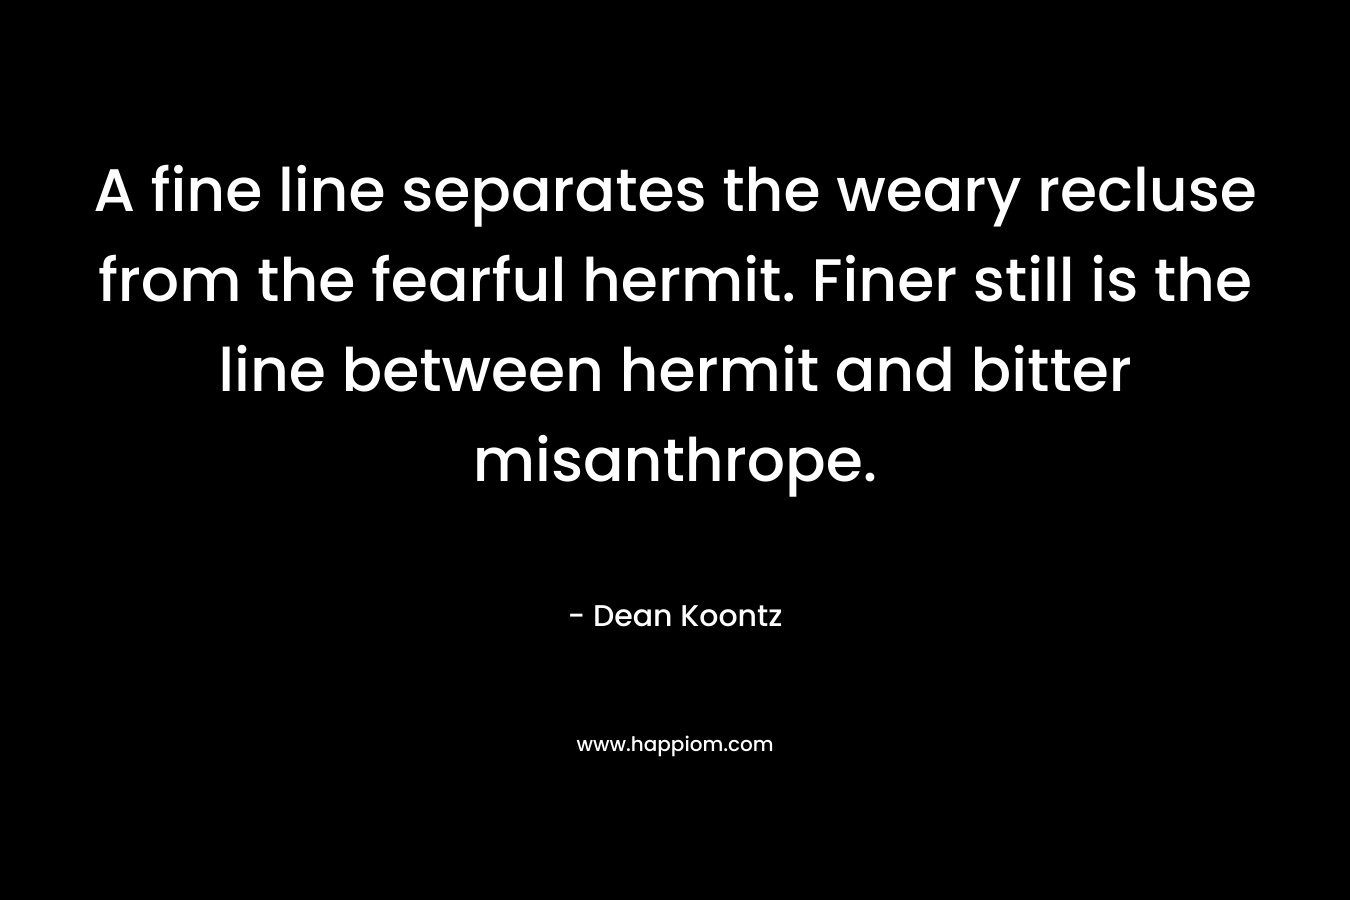 A fine line separates the weary recluse from the fearful hermit. Finer still is the line between hermit and bitter misanthrope. – Dean Koontz